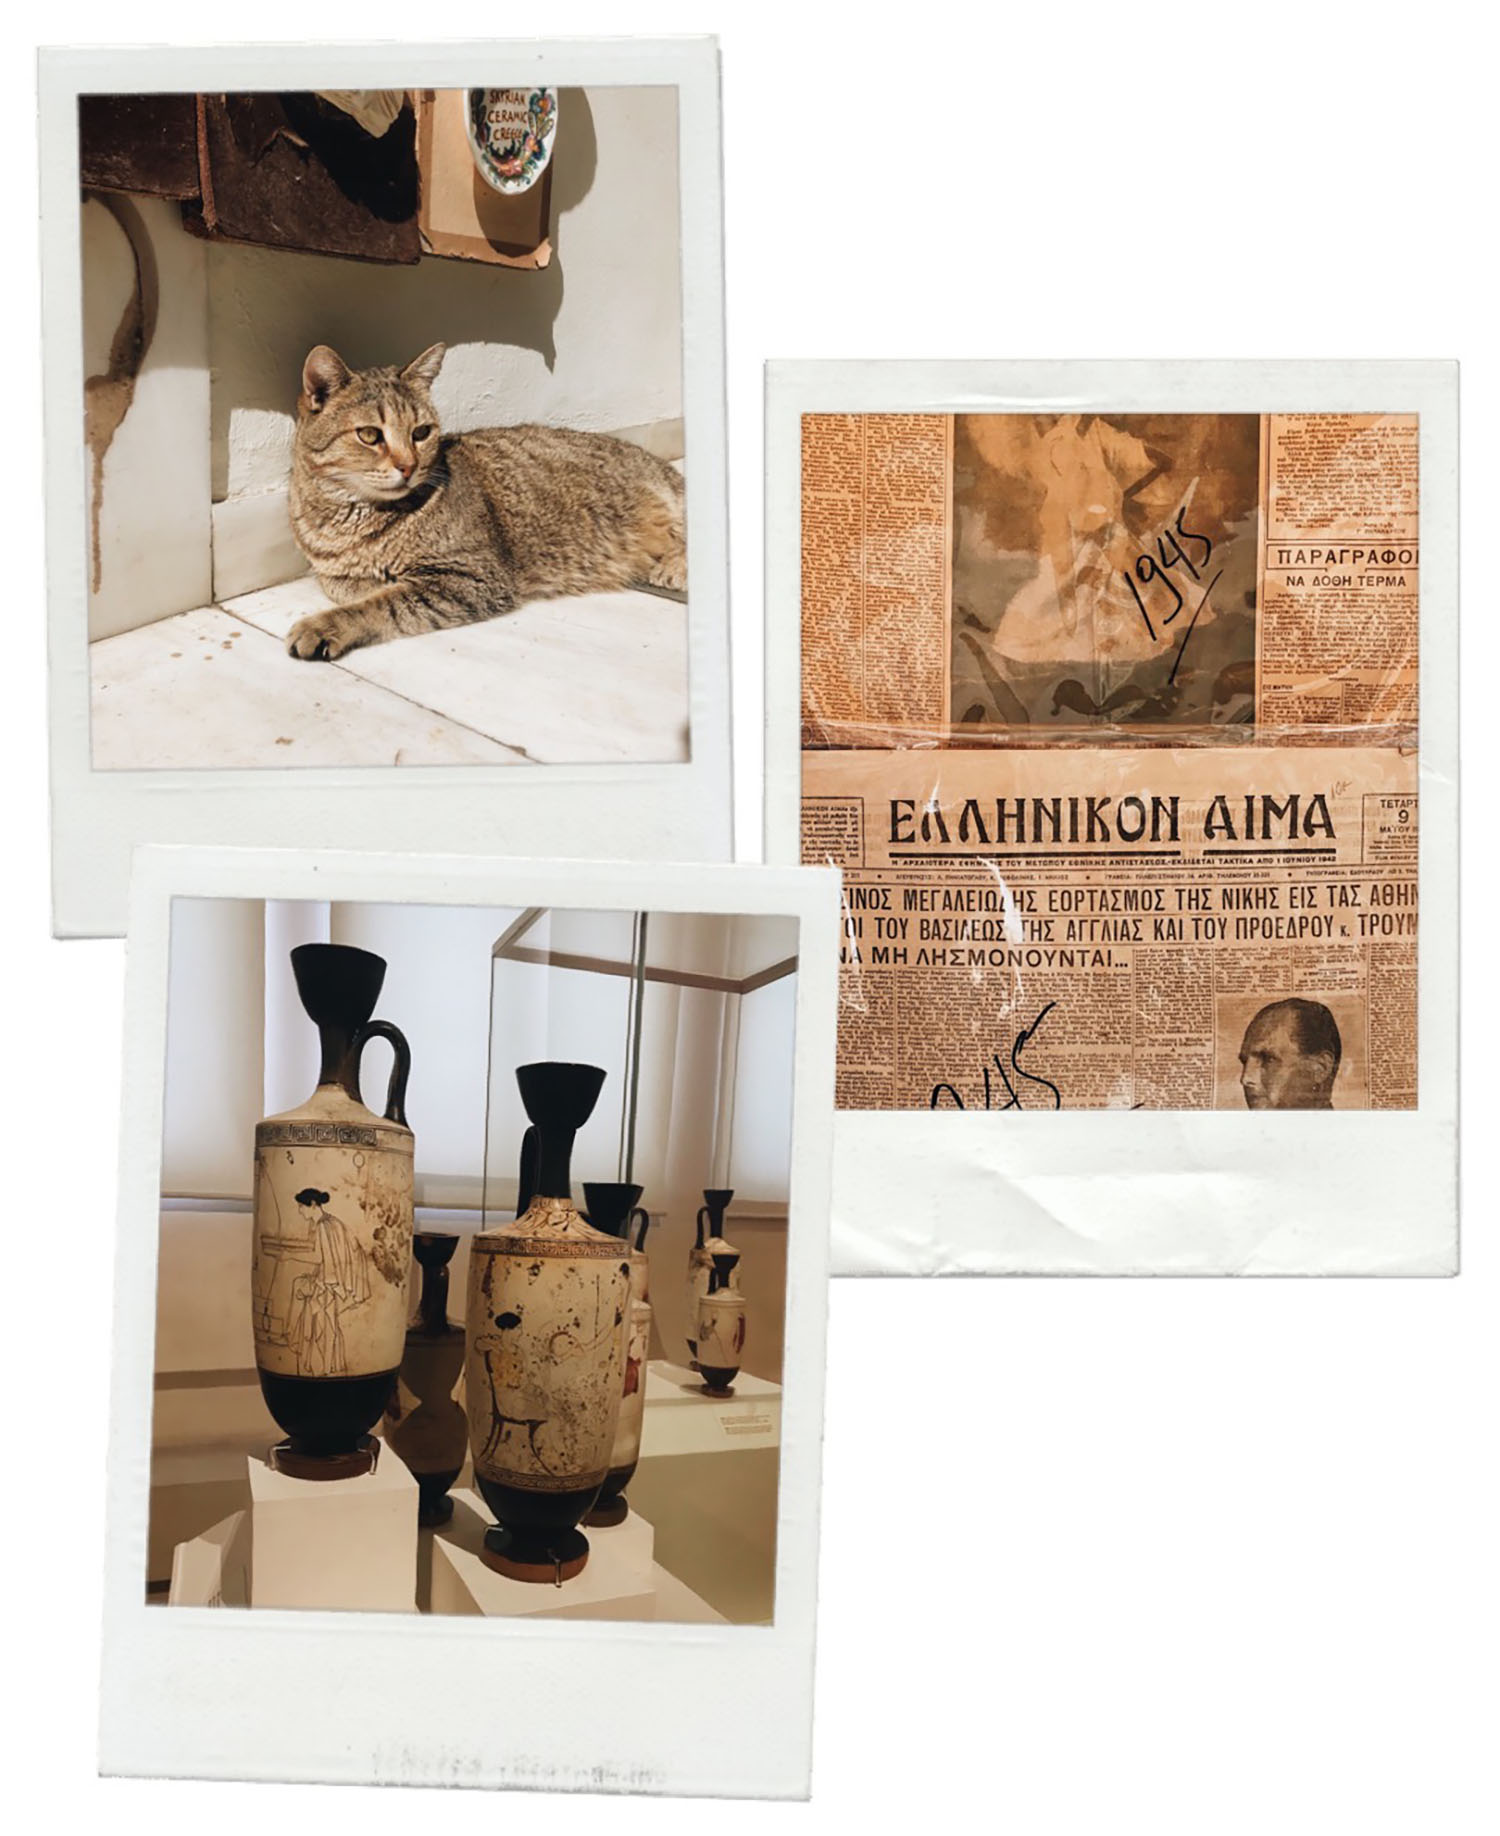 Coco & Vera - A cat, ancient vases and vintage newspapers in Athens